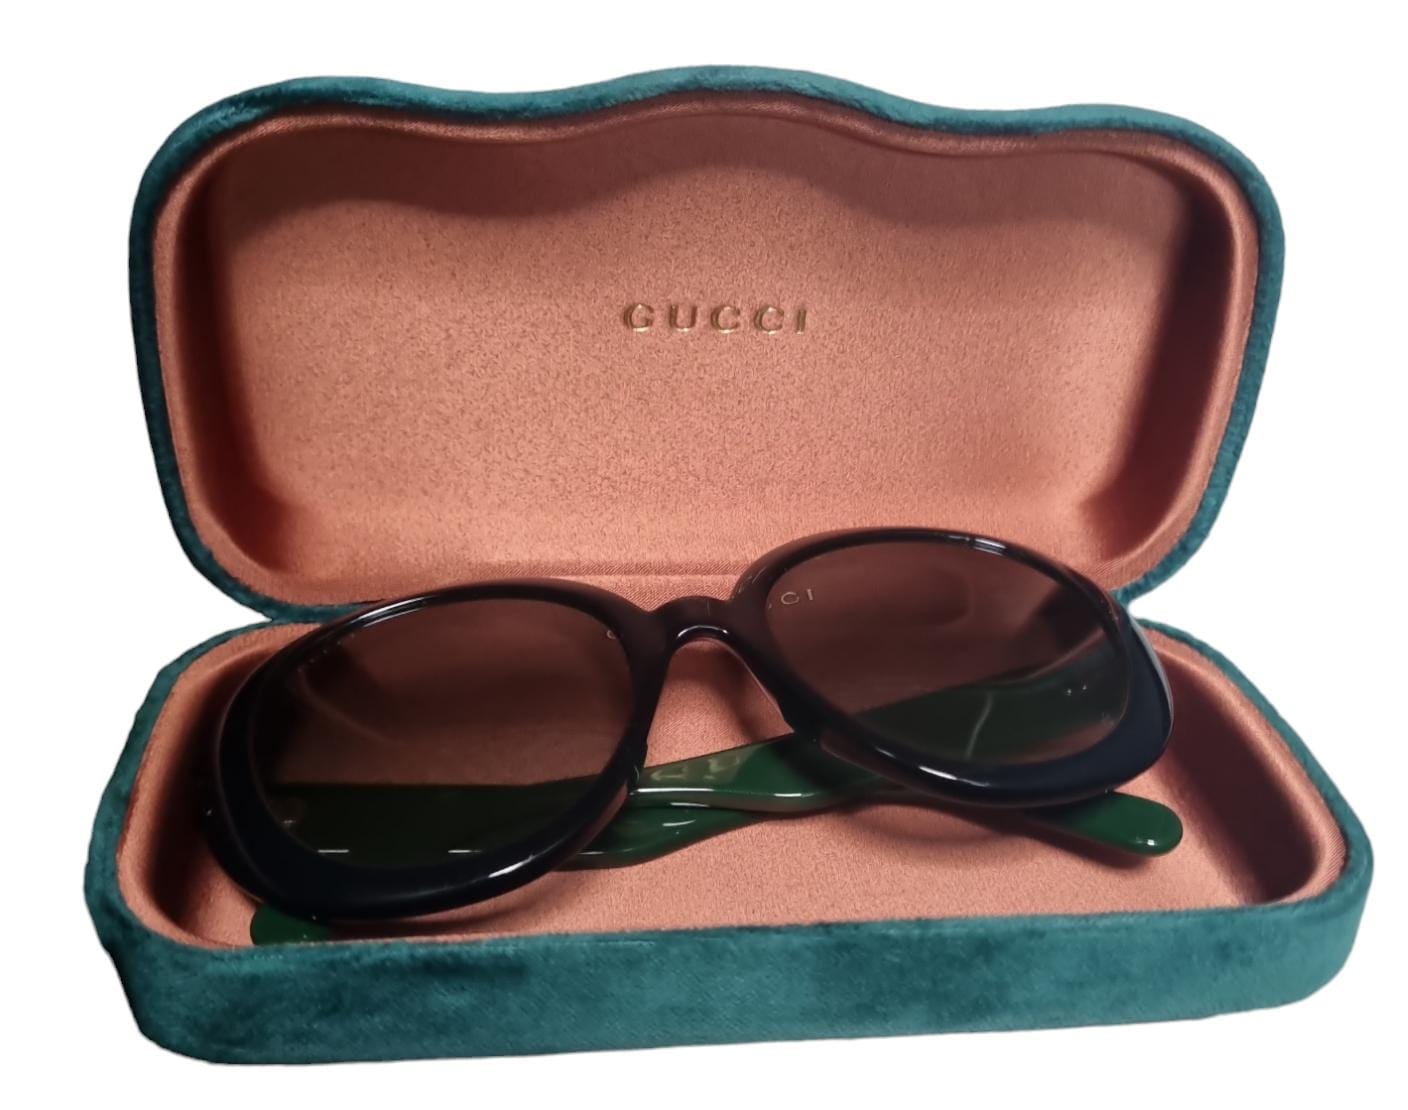 Gucci Sunglasses - WEK15BUAZN - Green, Red and Gold